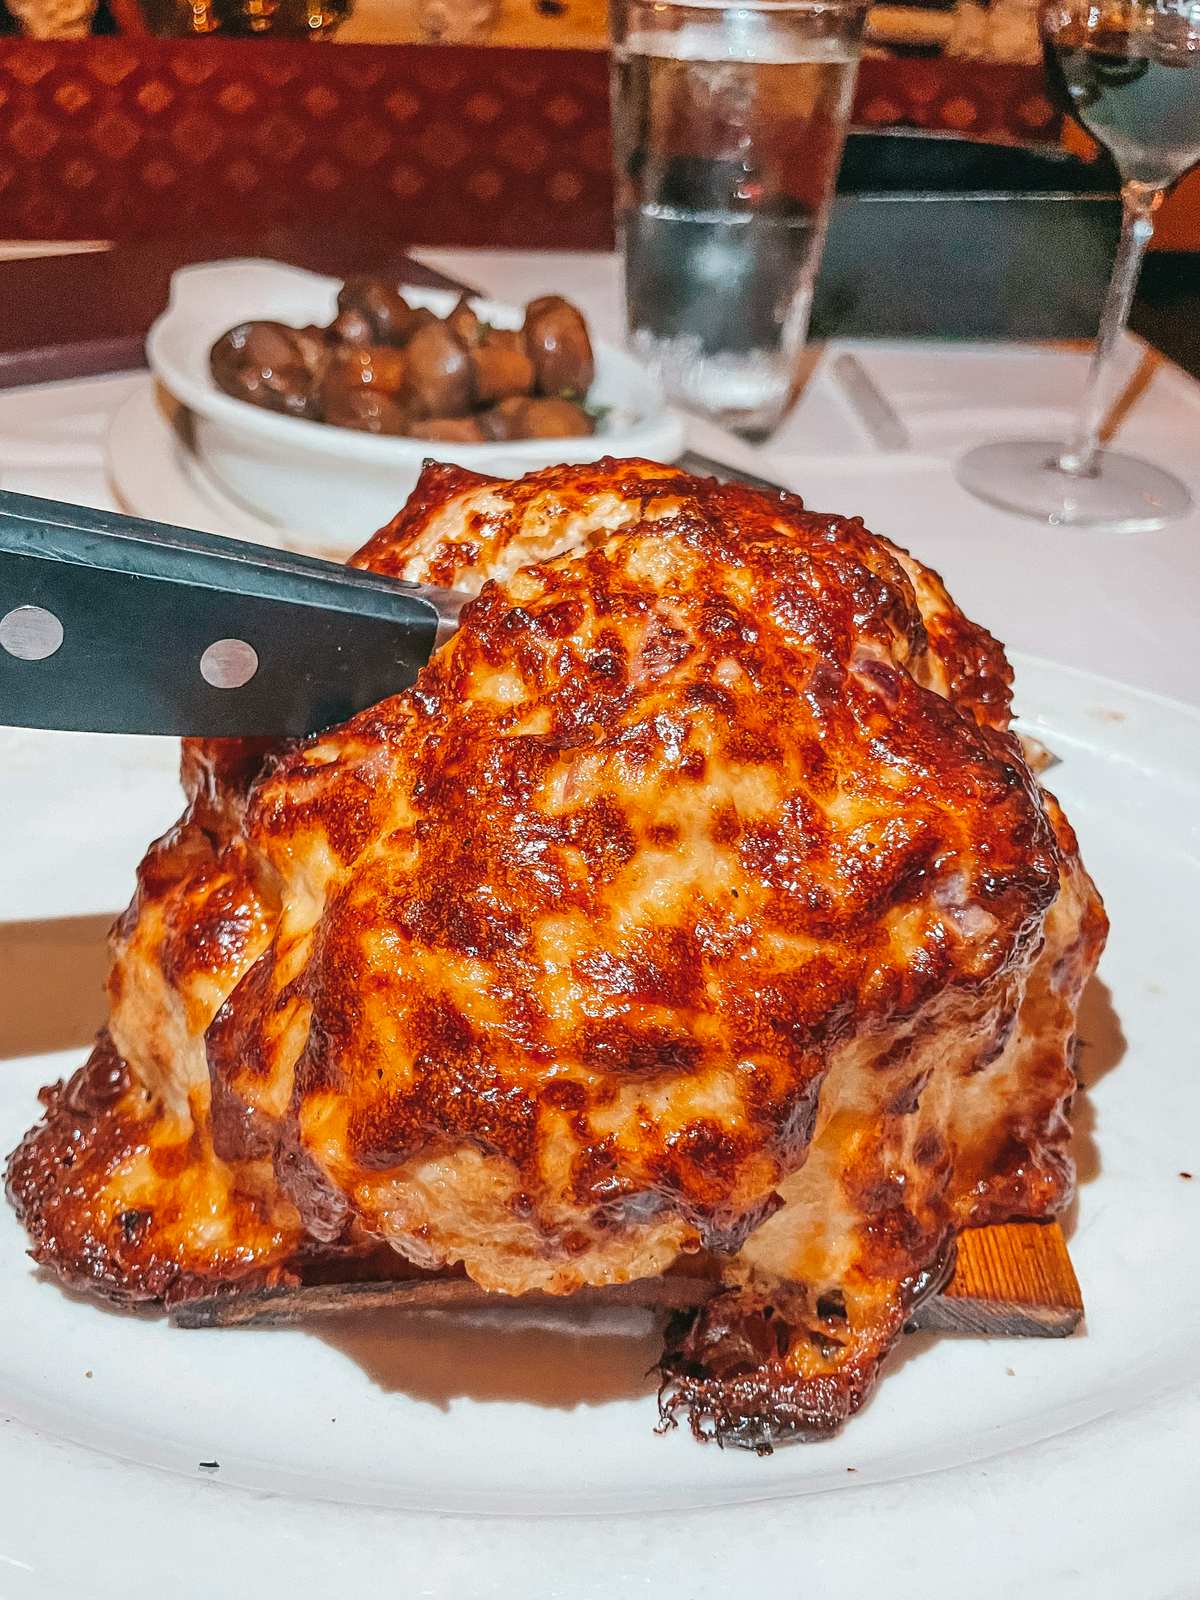 Roasted cauliflower from Charleys Steakhouse in Tampa Florida